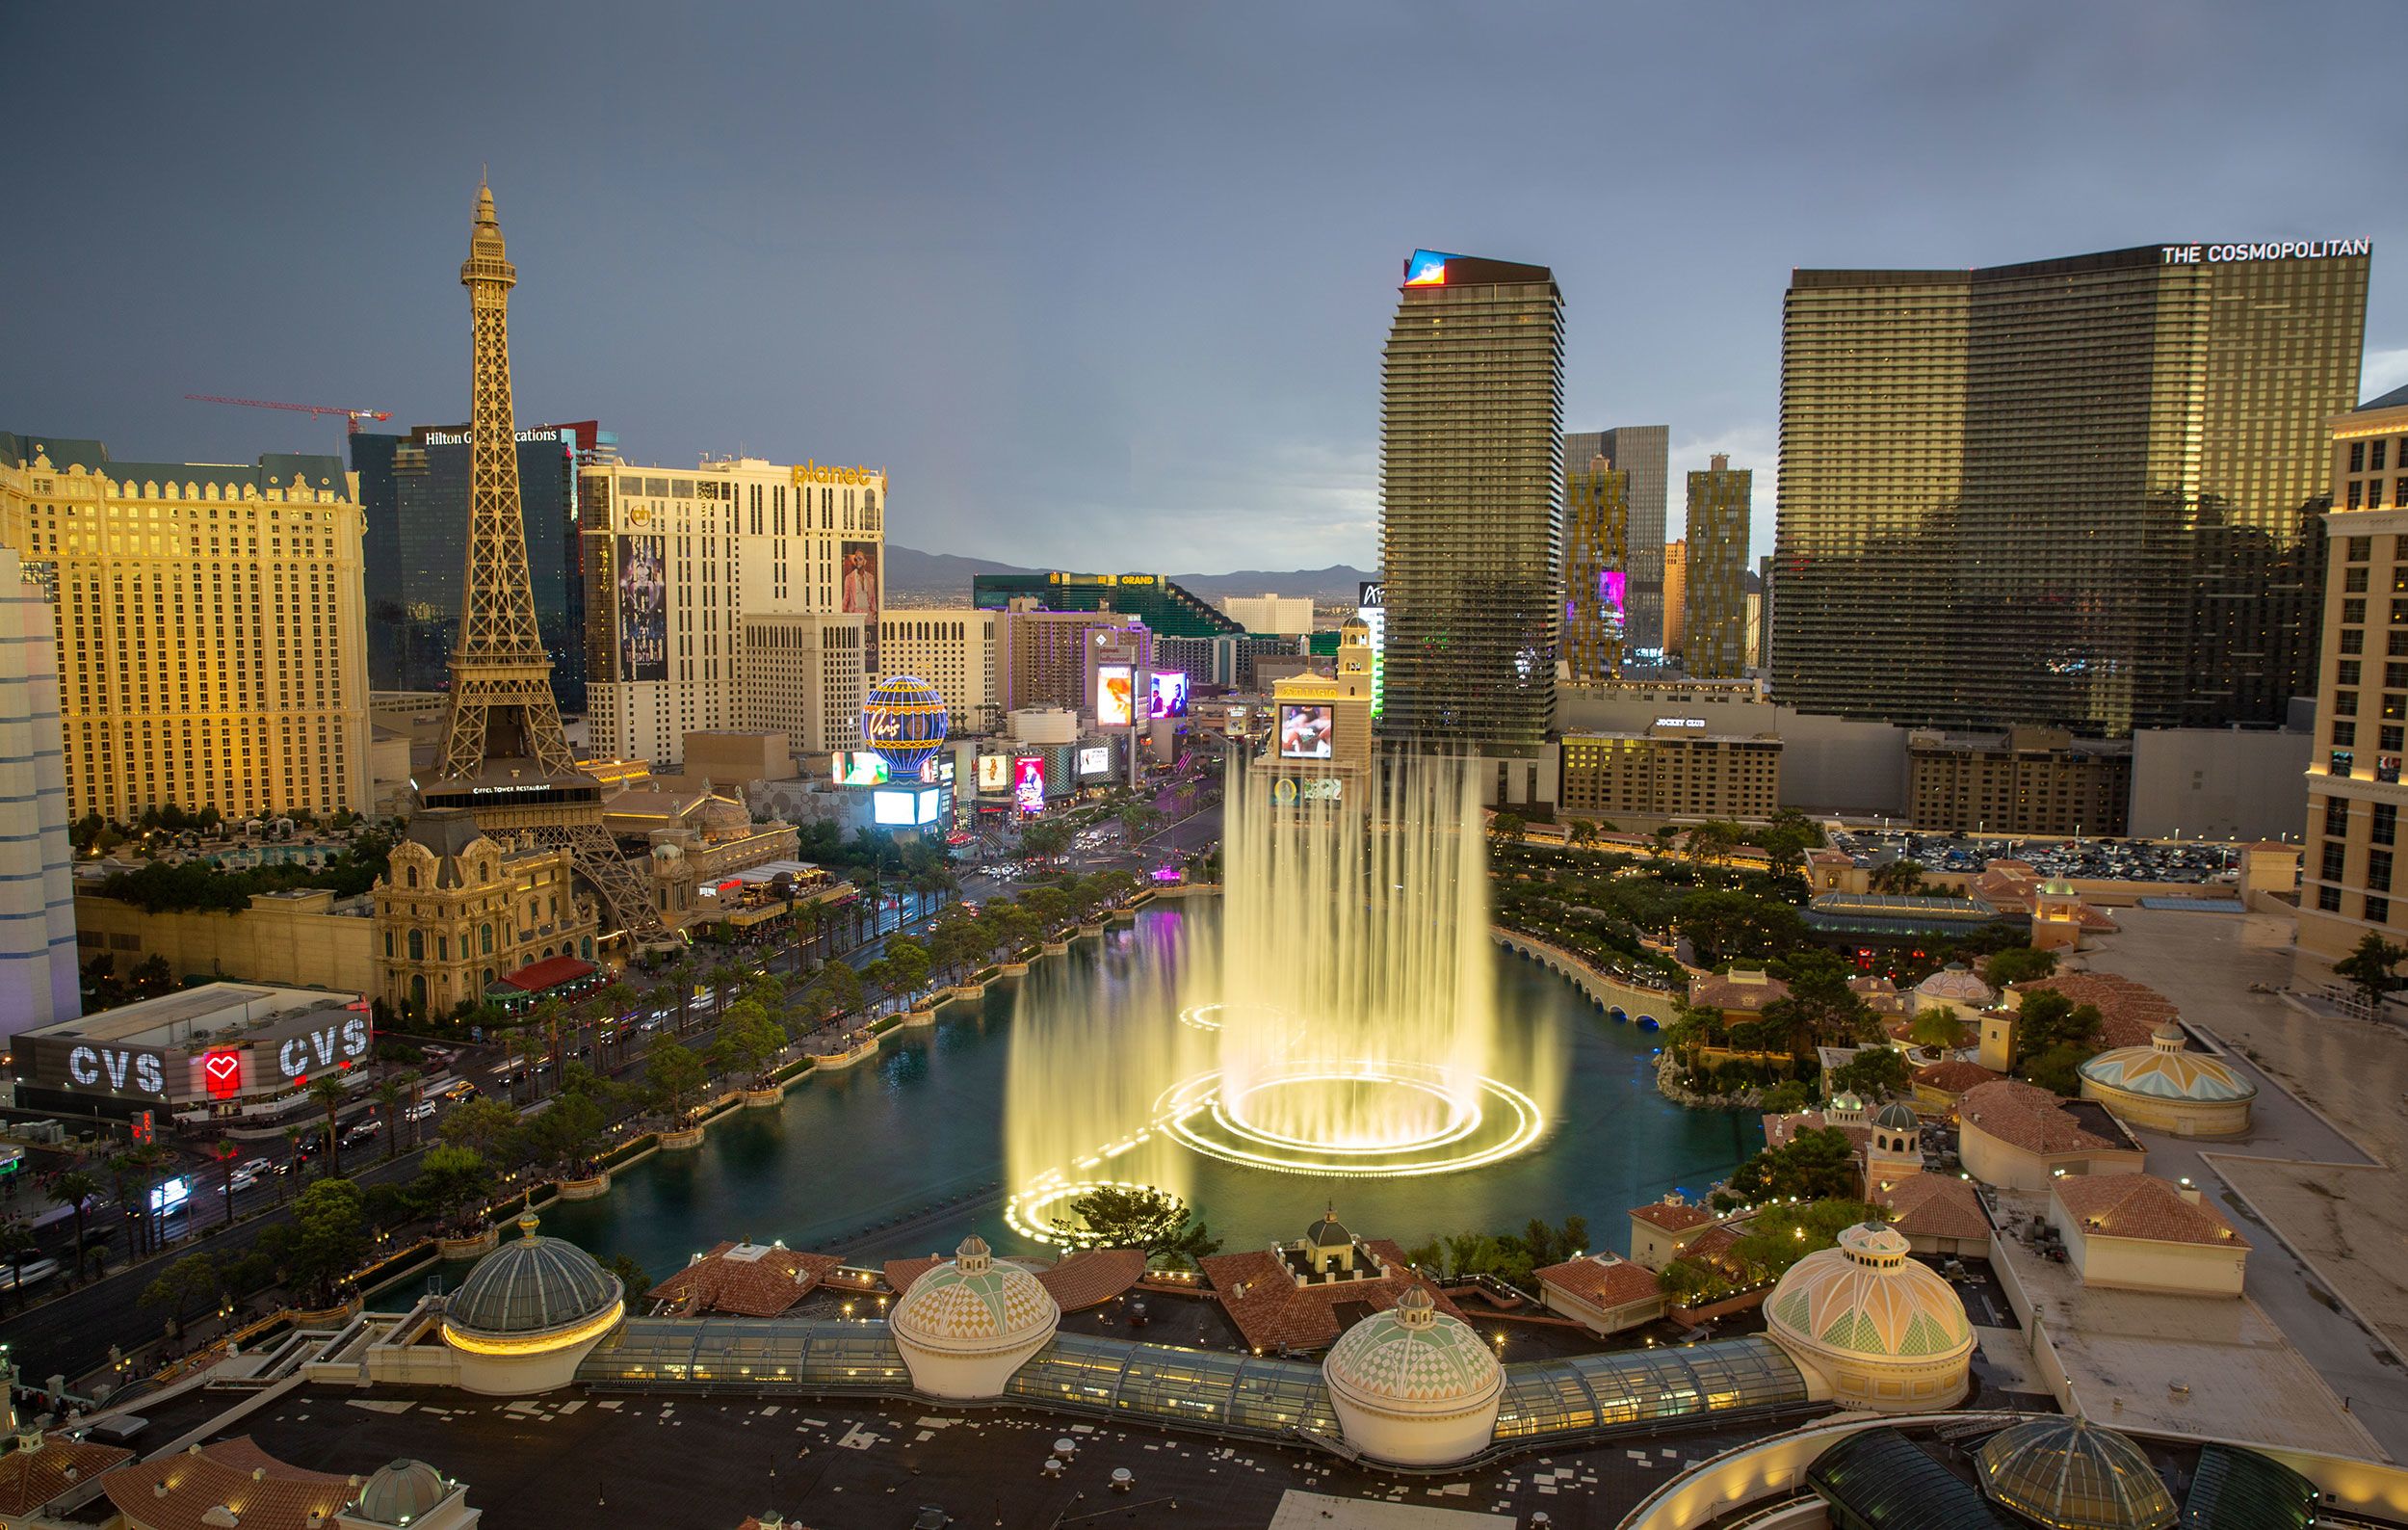 Can Las Vegas Be Made Sustainable?